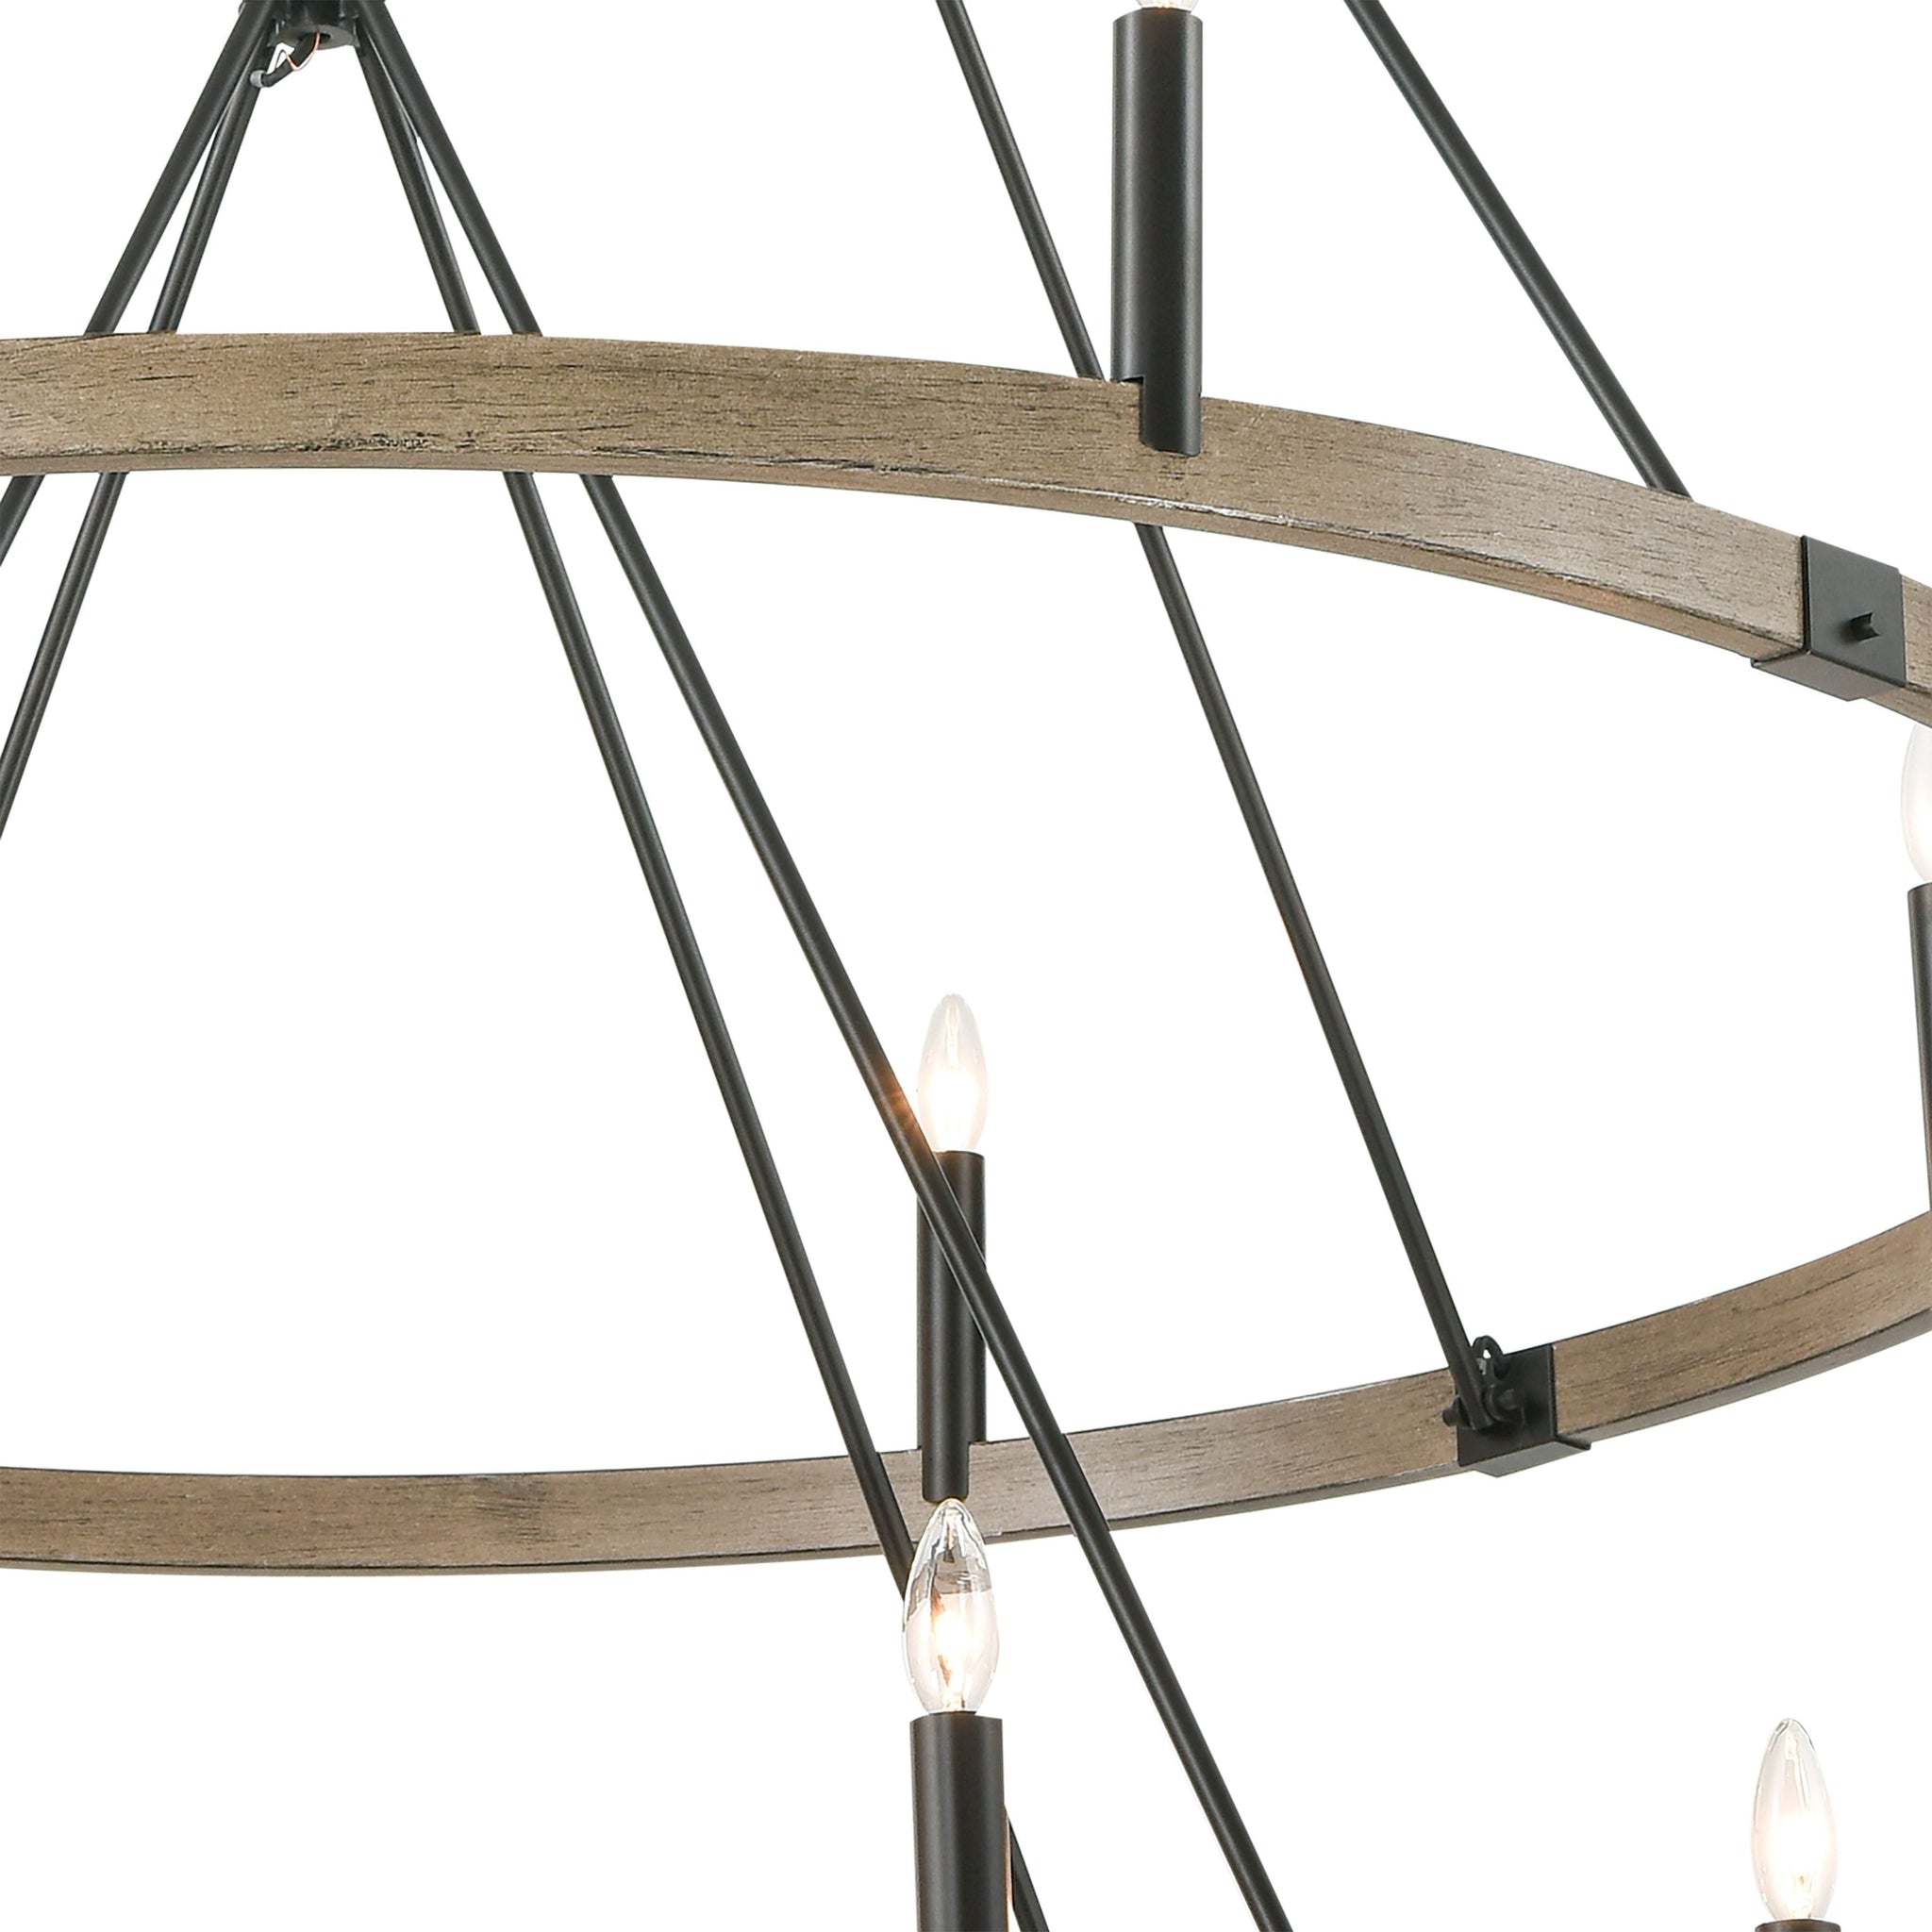 Transitions 56" Wide 16-Light Chandelier